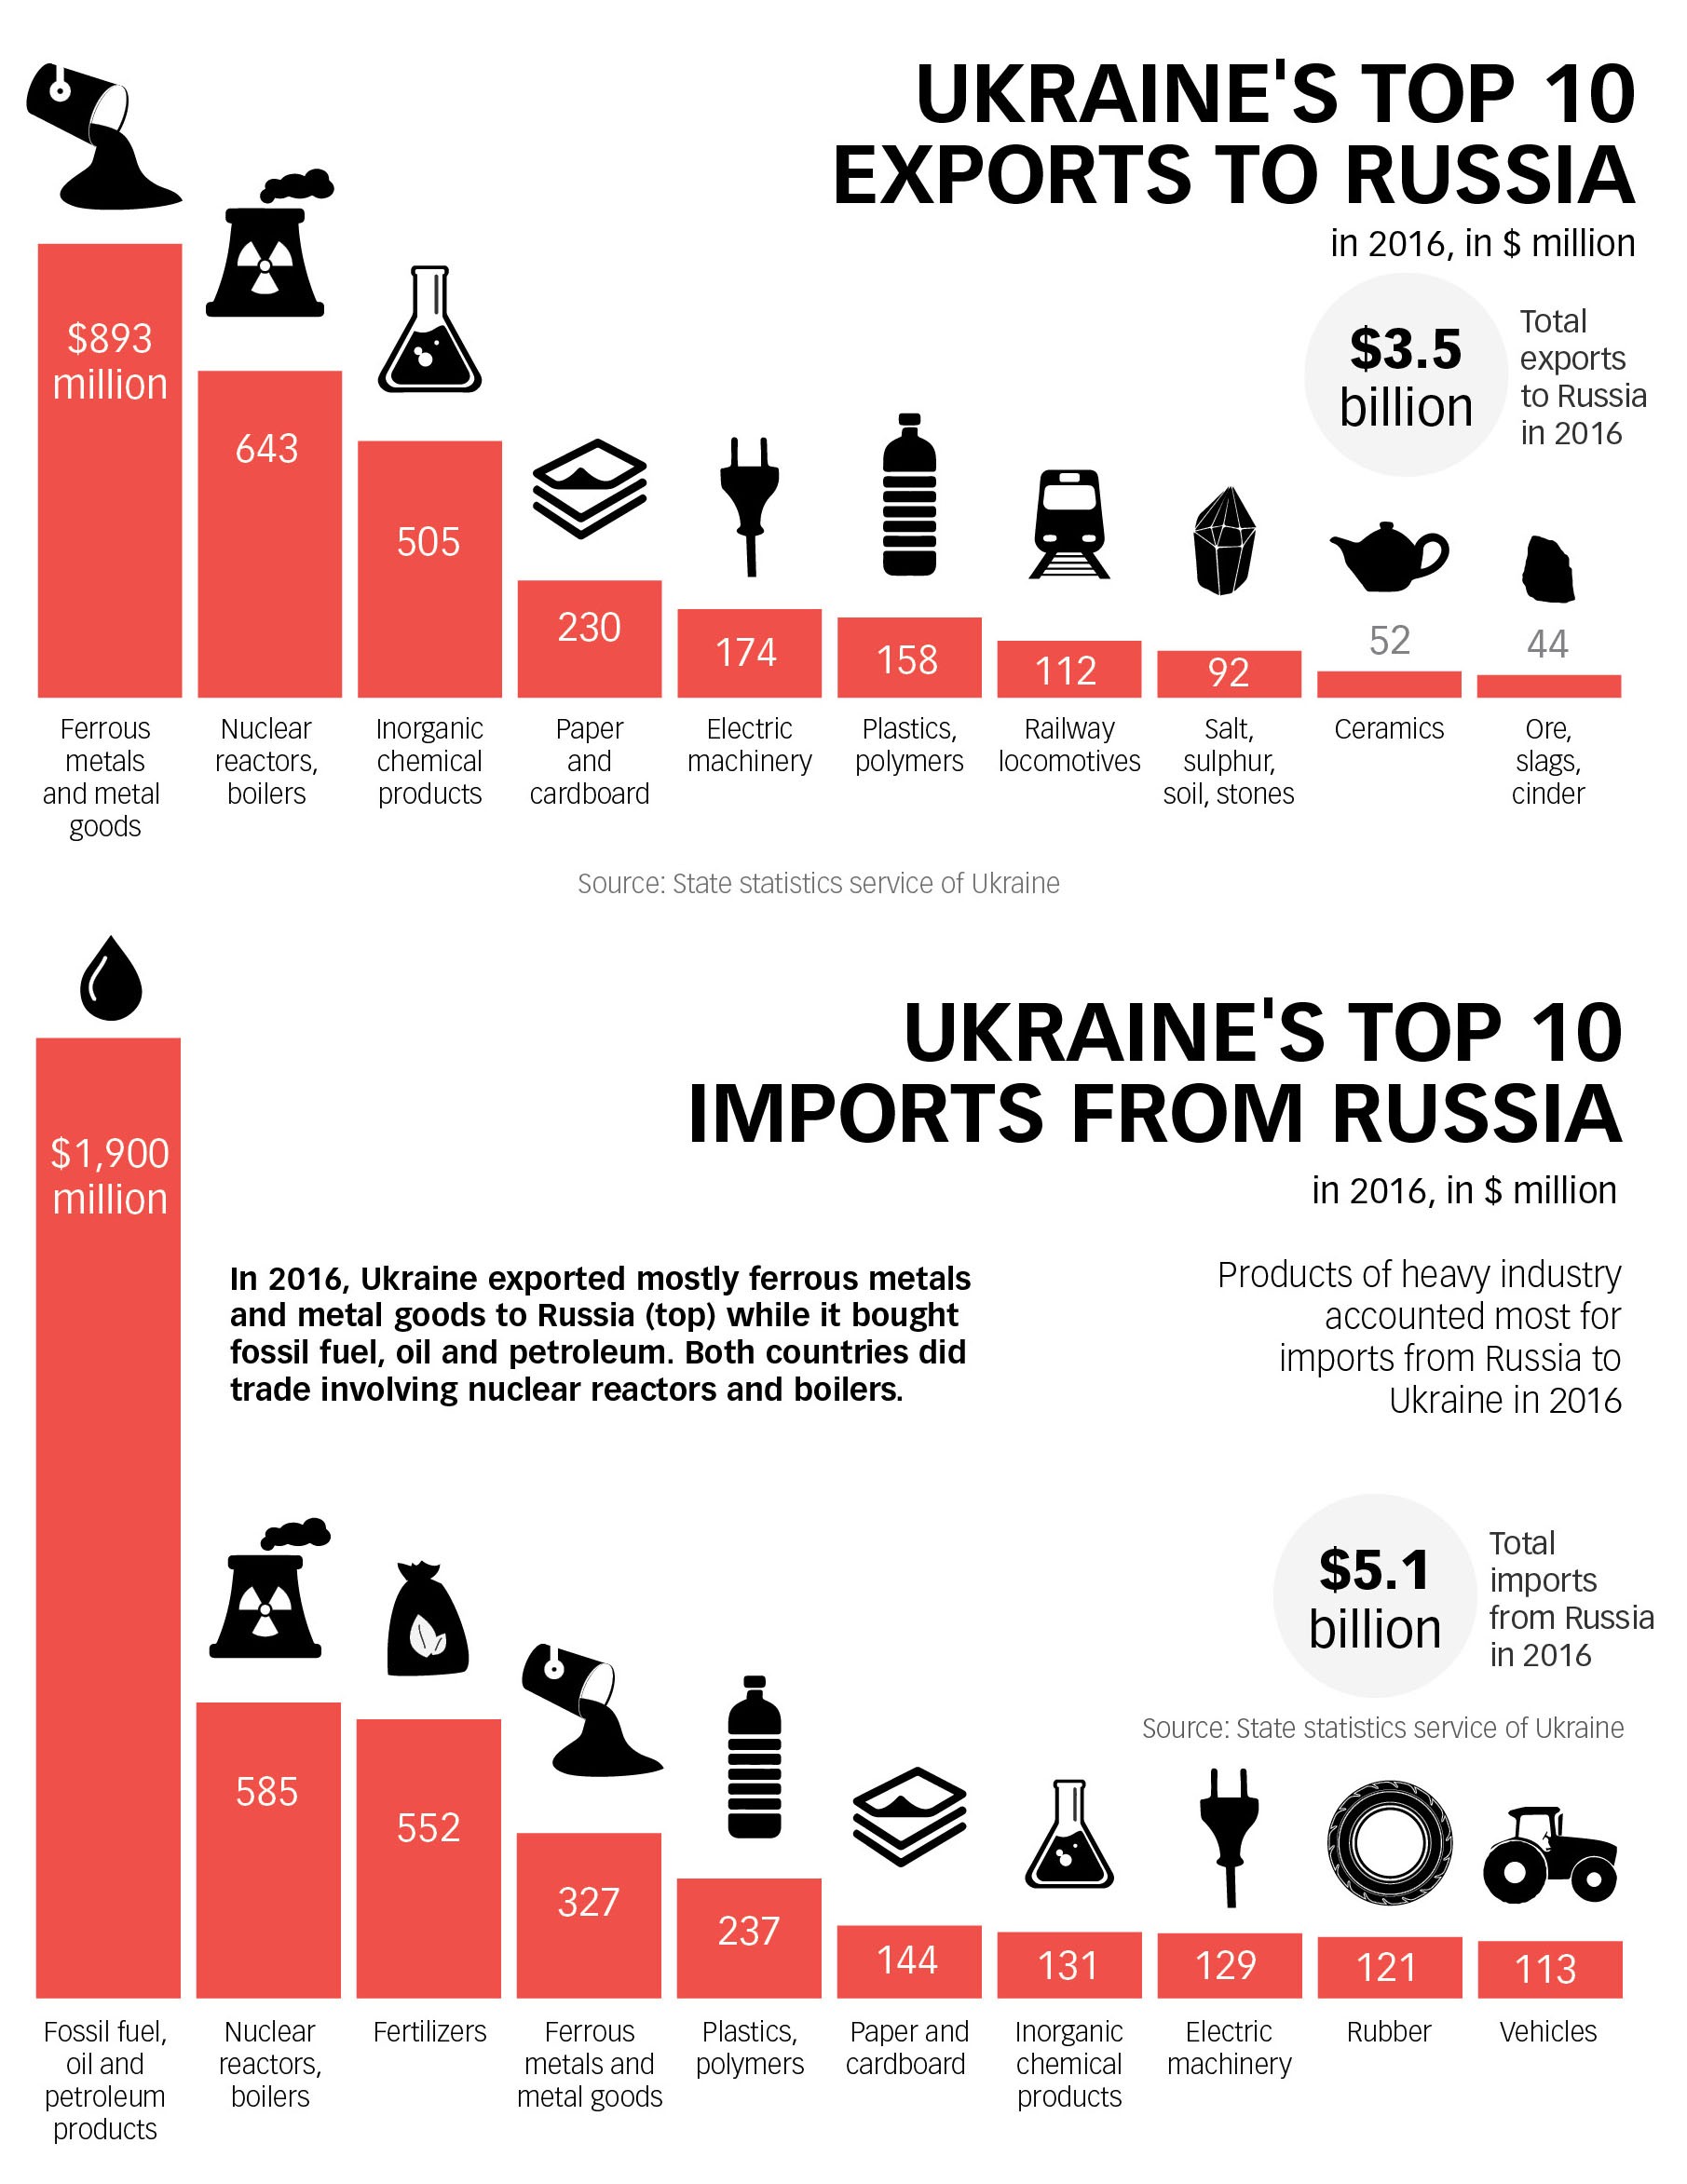 In 2016, Ukraine exported mostly ferrous metals and metal goods to Russia (top) while it bought fossil fuel, oil and petroleum. Both countries did trade involving nuclear reactors and boilers.